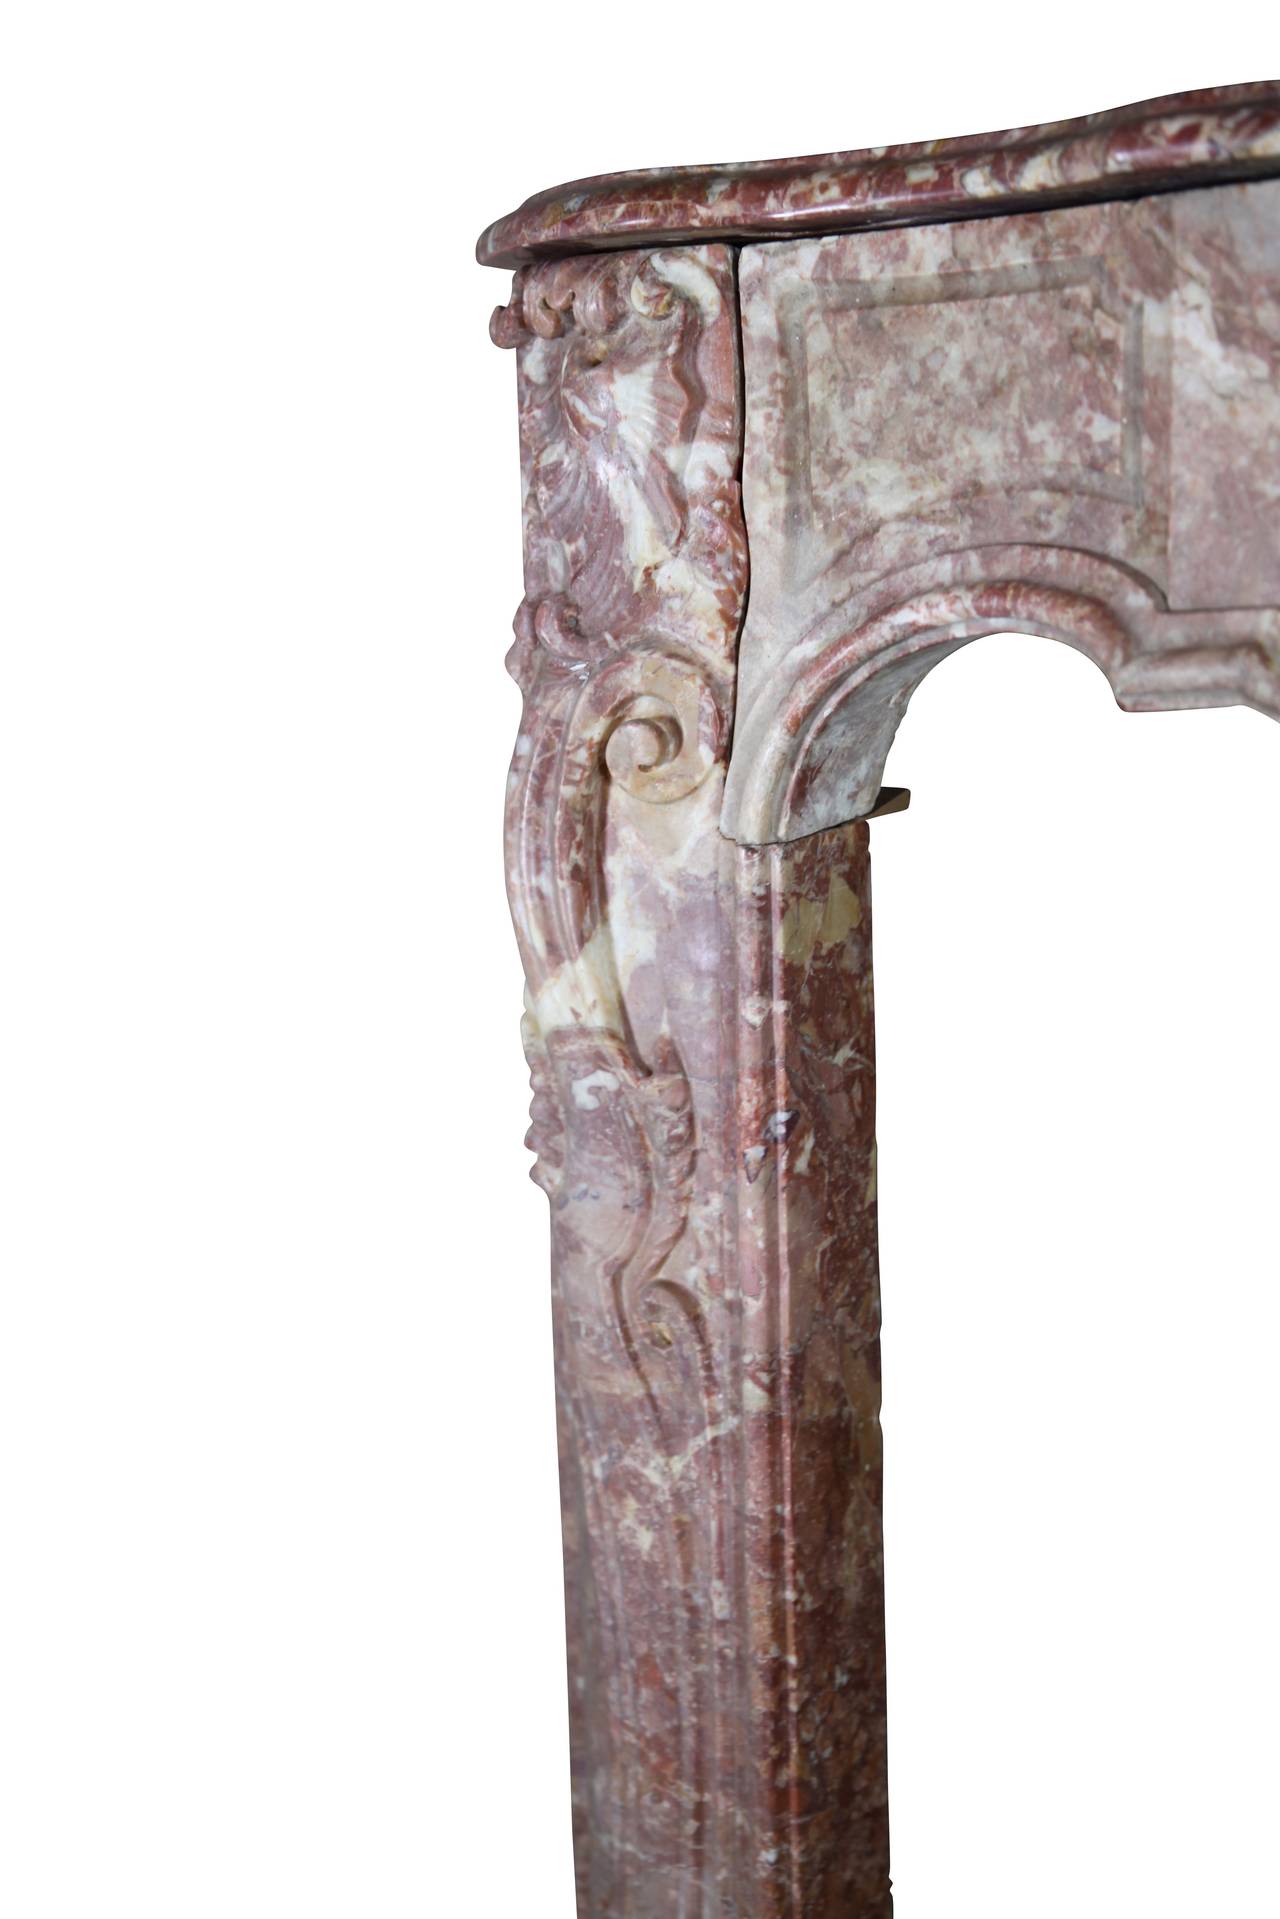 This color full original antique fireplace surround has an arbalette design on the fronton. It was crafted during the Regency Period. The front is a solid block of marble. The rich carving on the mantel is very decorative. It is from Florence. The